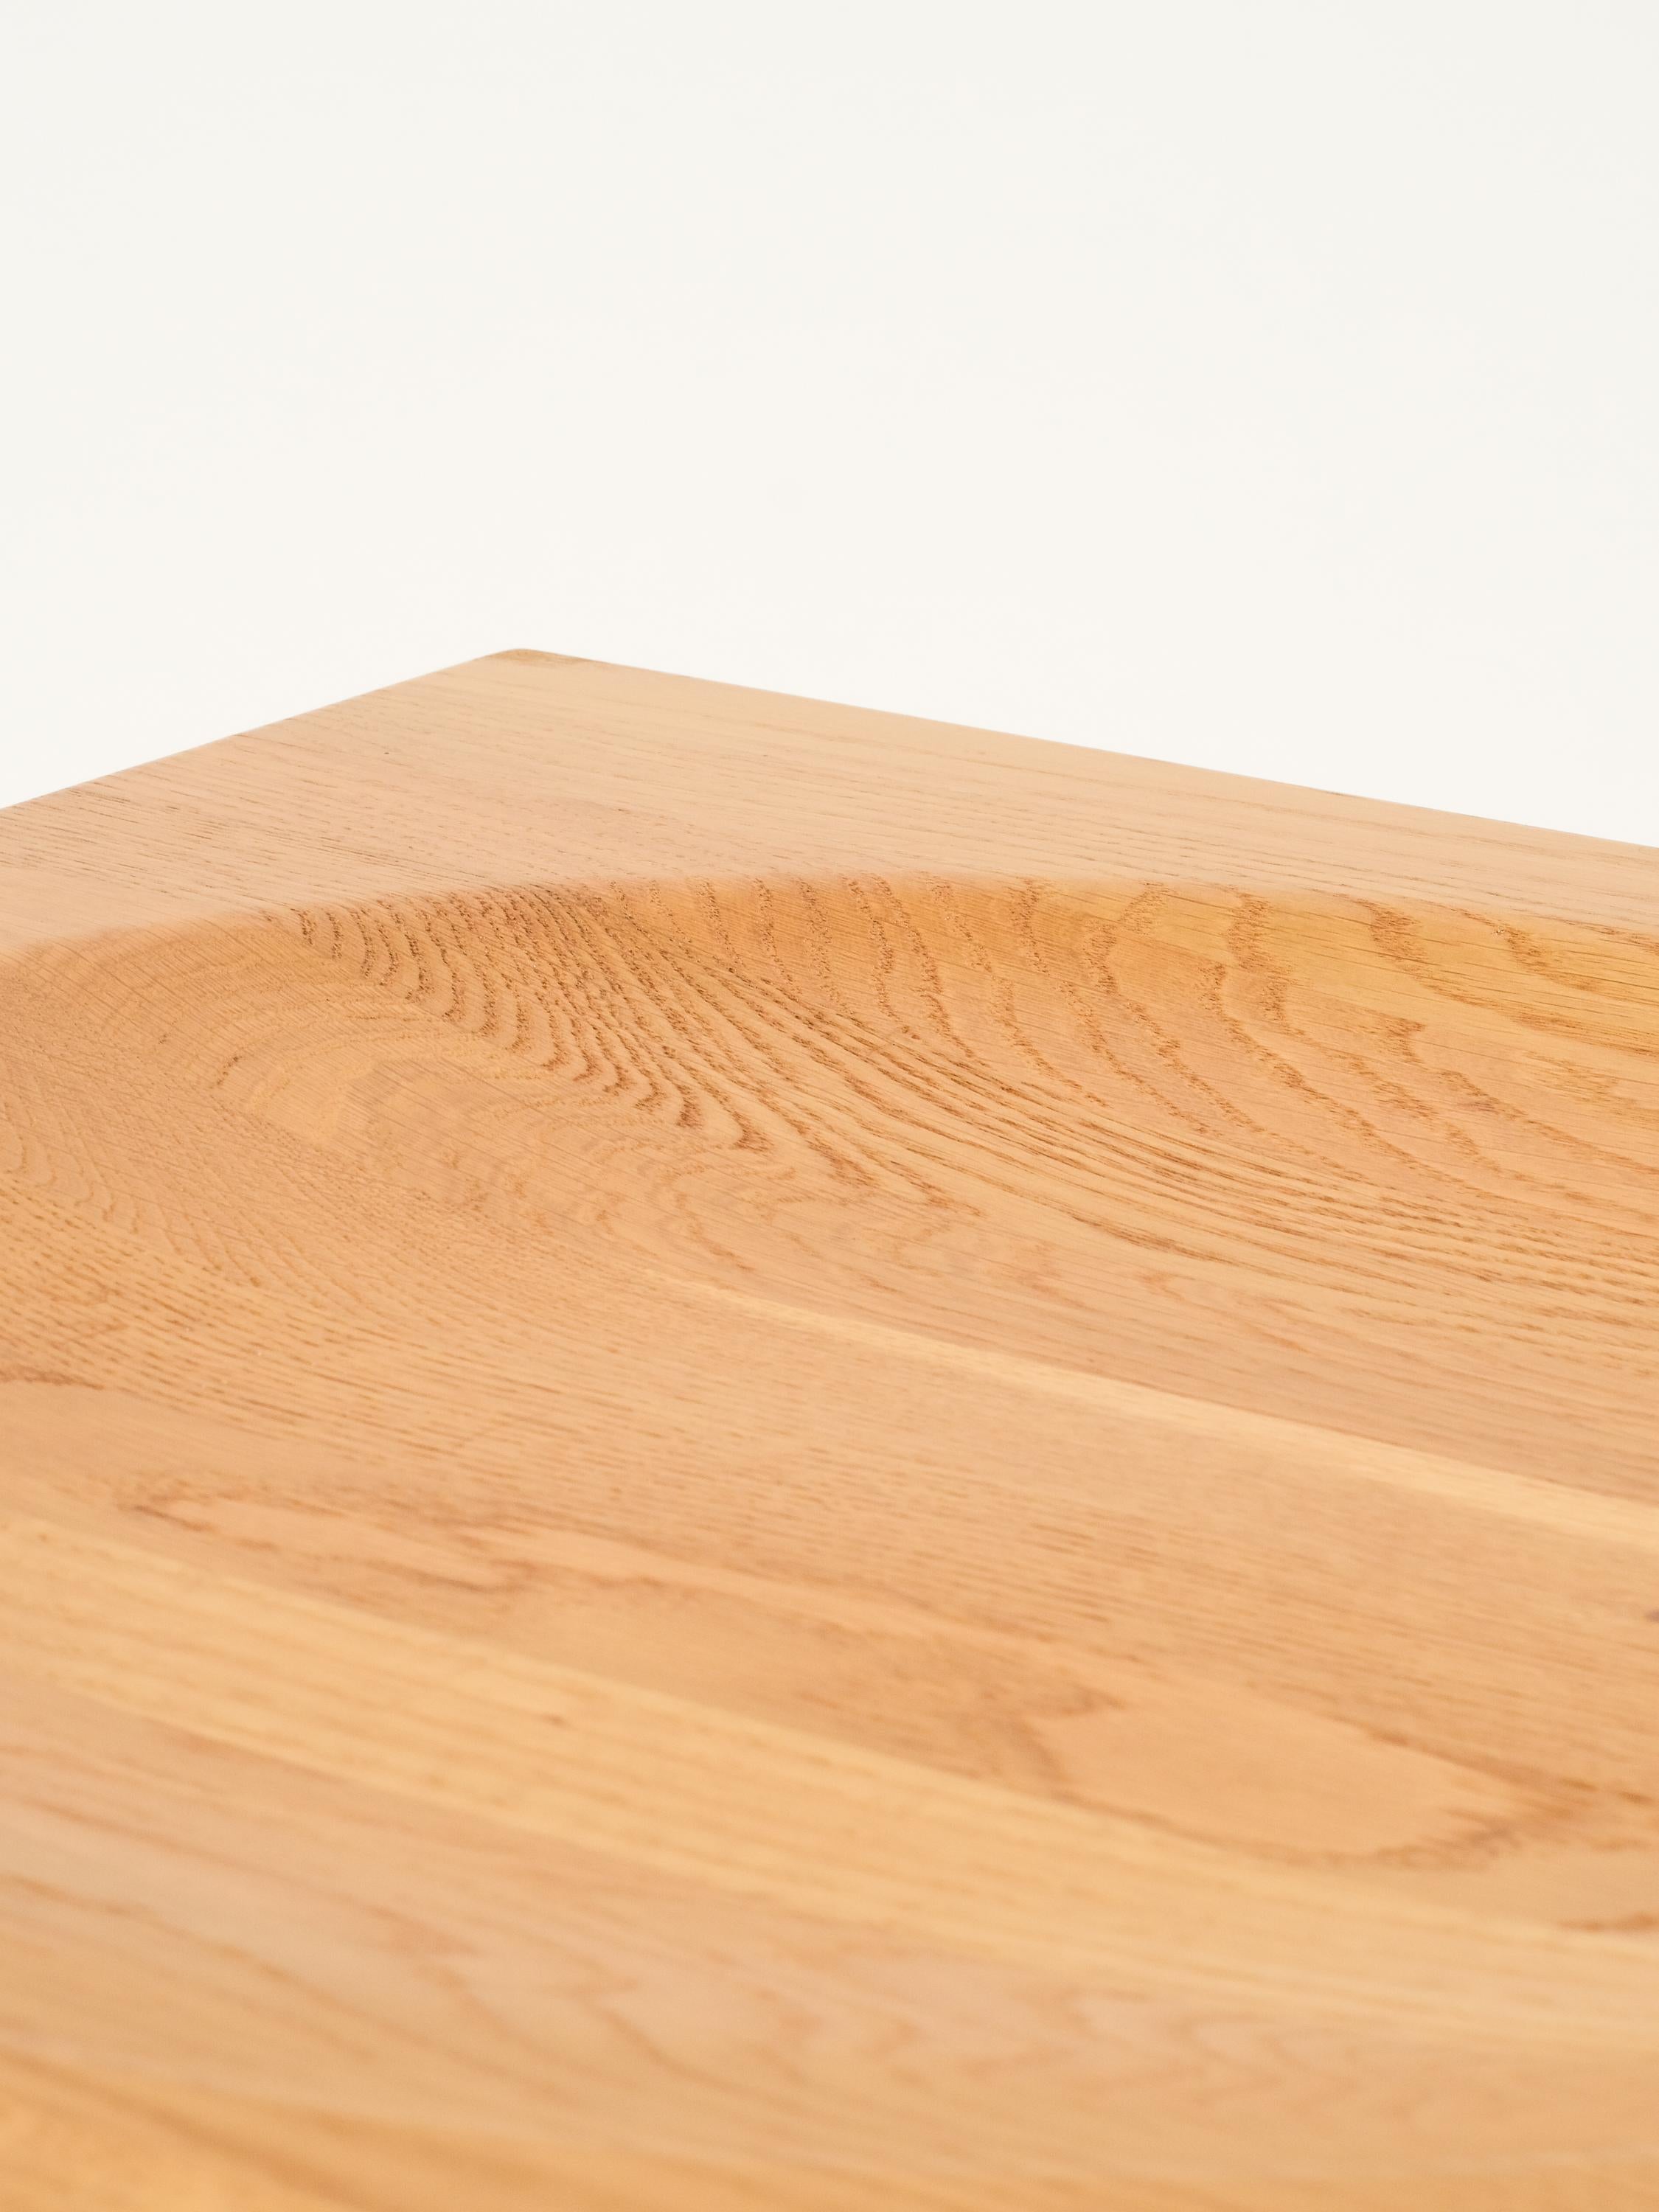 Solid Oak Coffee/Tray Table by Gunnar Myrstrand for Källemo, Sweden, 1960s For Sale 3